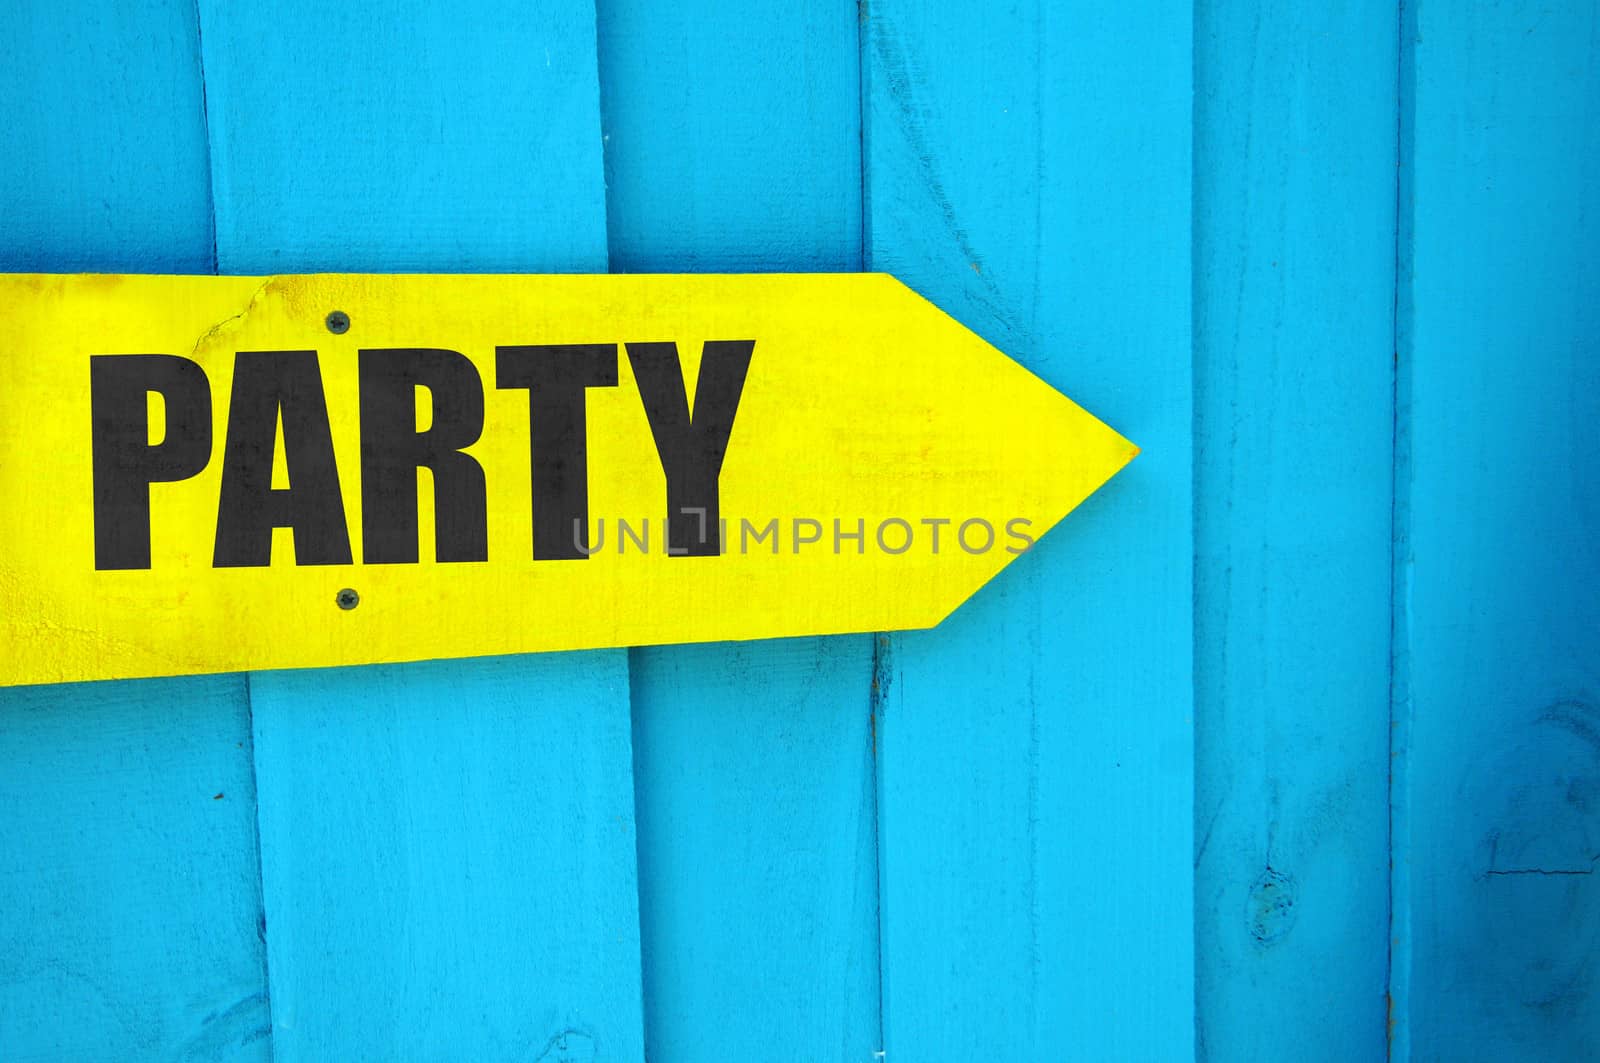 This way to the party sign